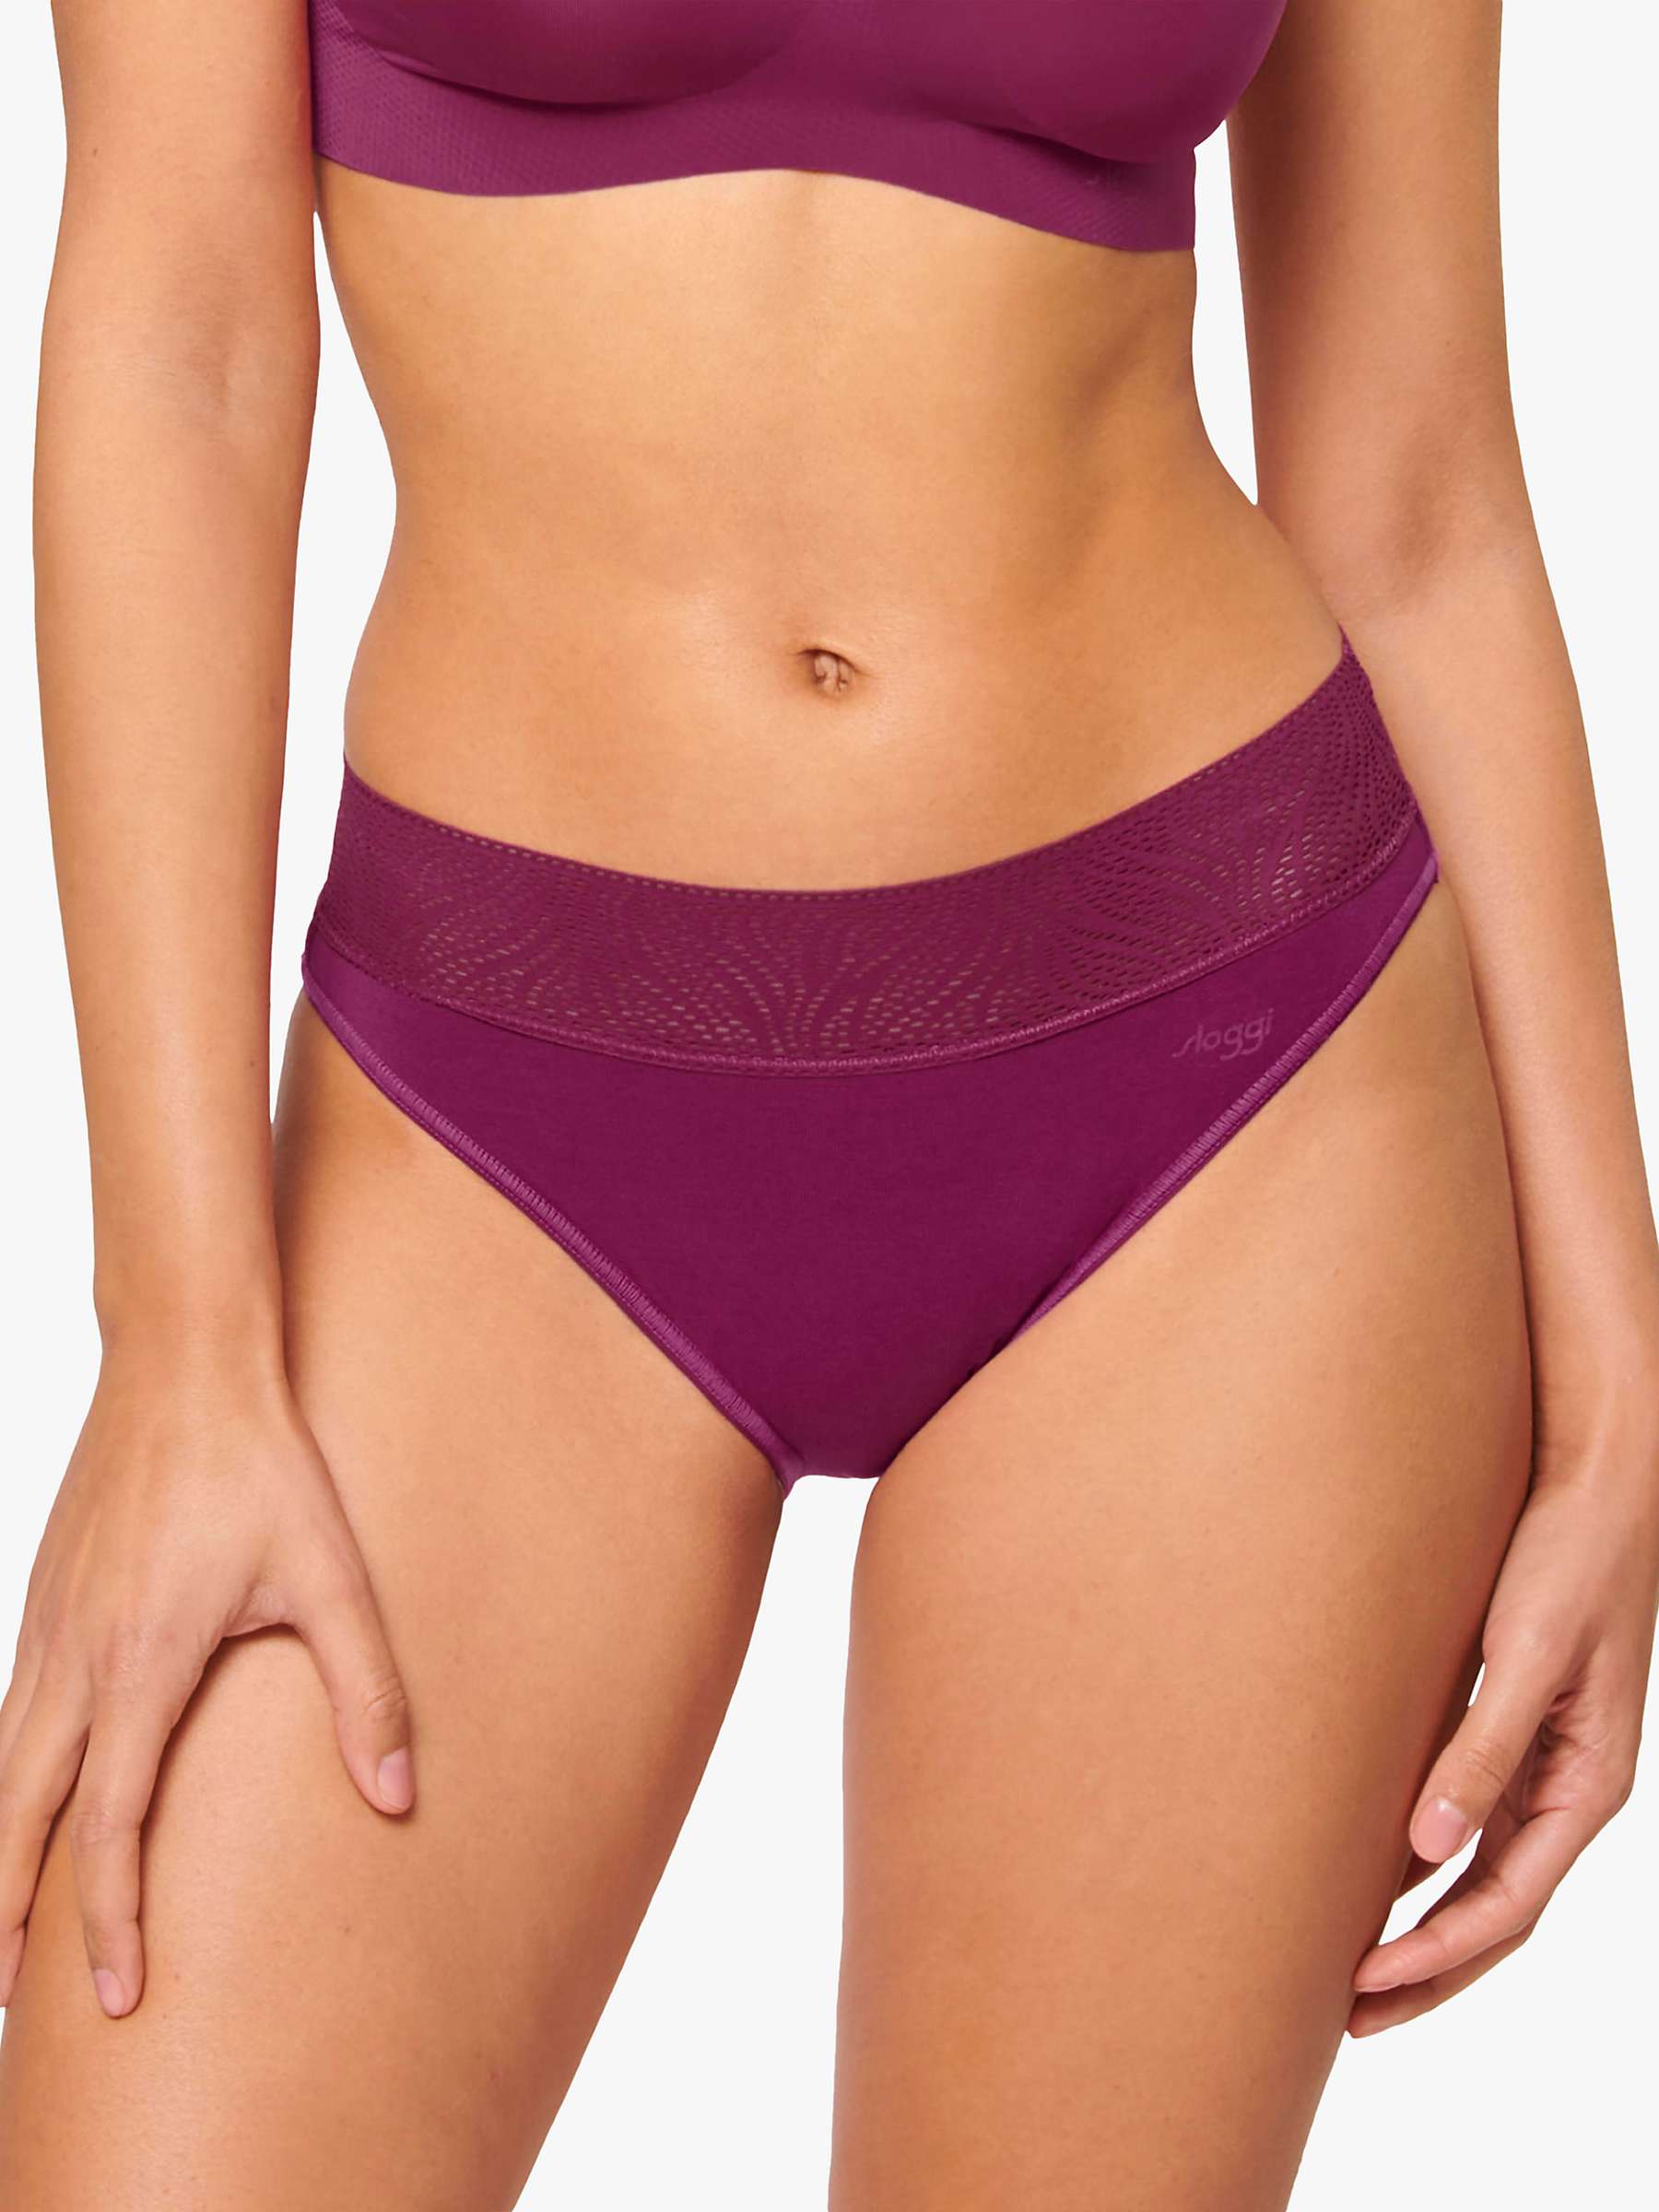 Buy sloggi Light Absorbency Tai Period Knickers, Pack of 2 Online at johnlewis.com